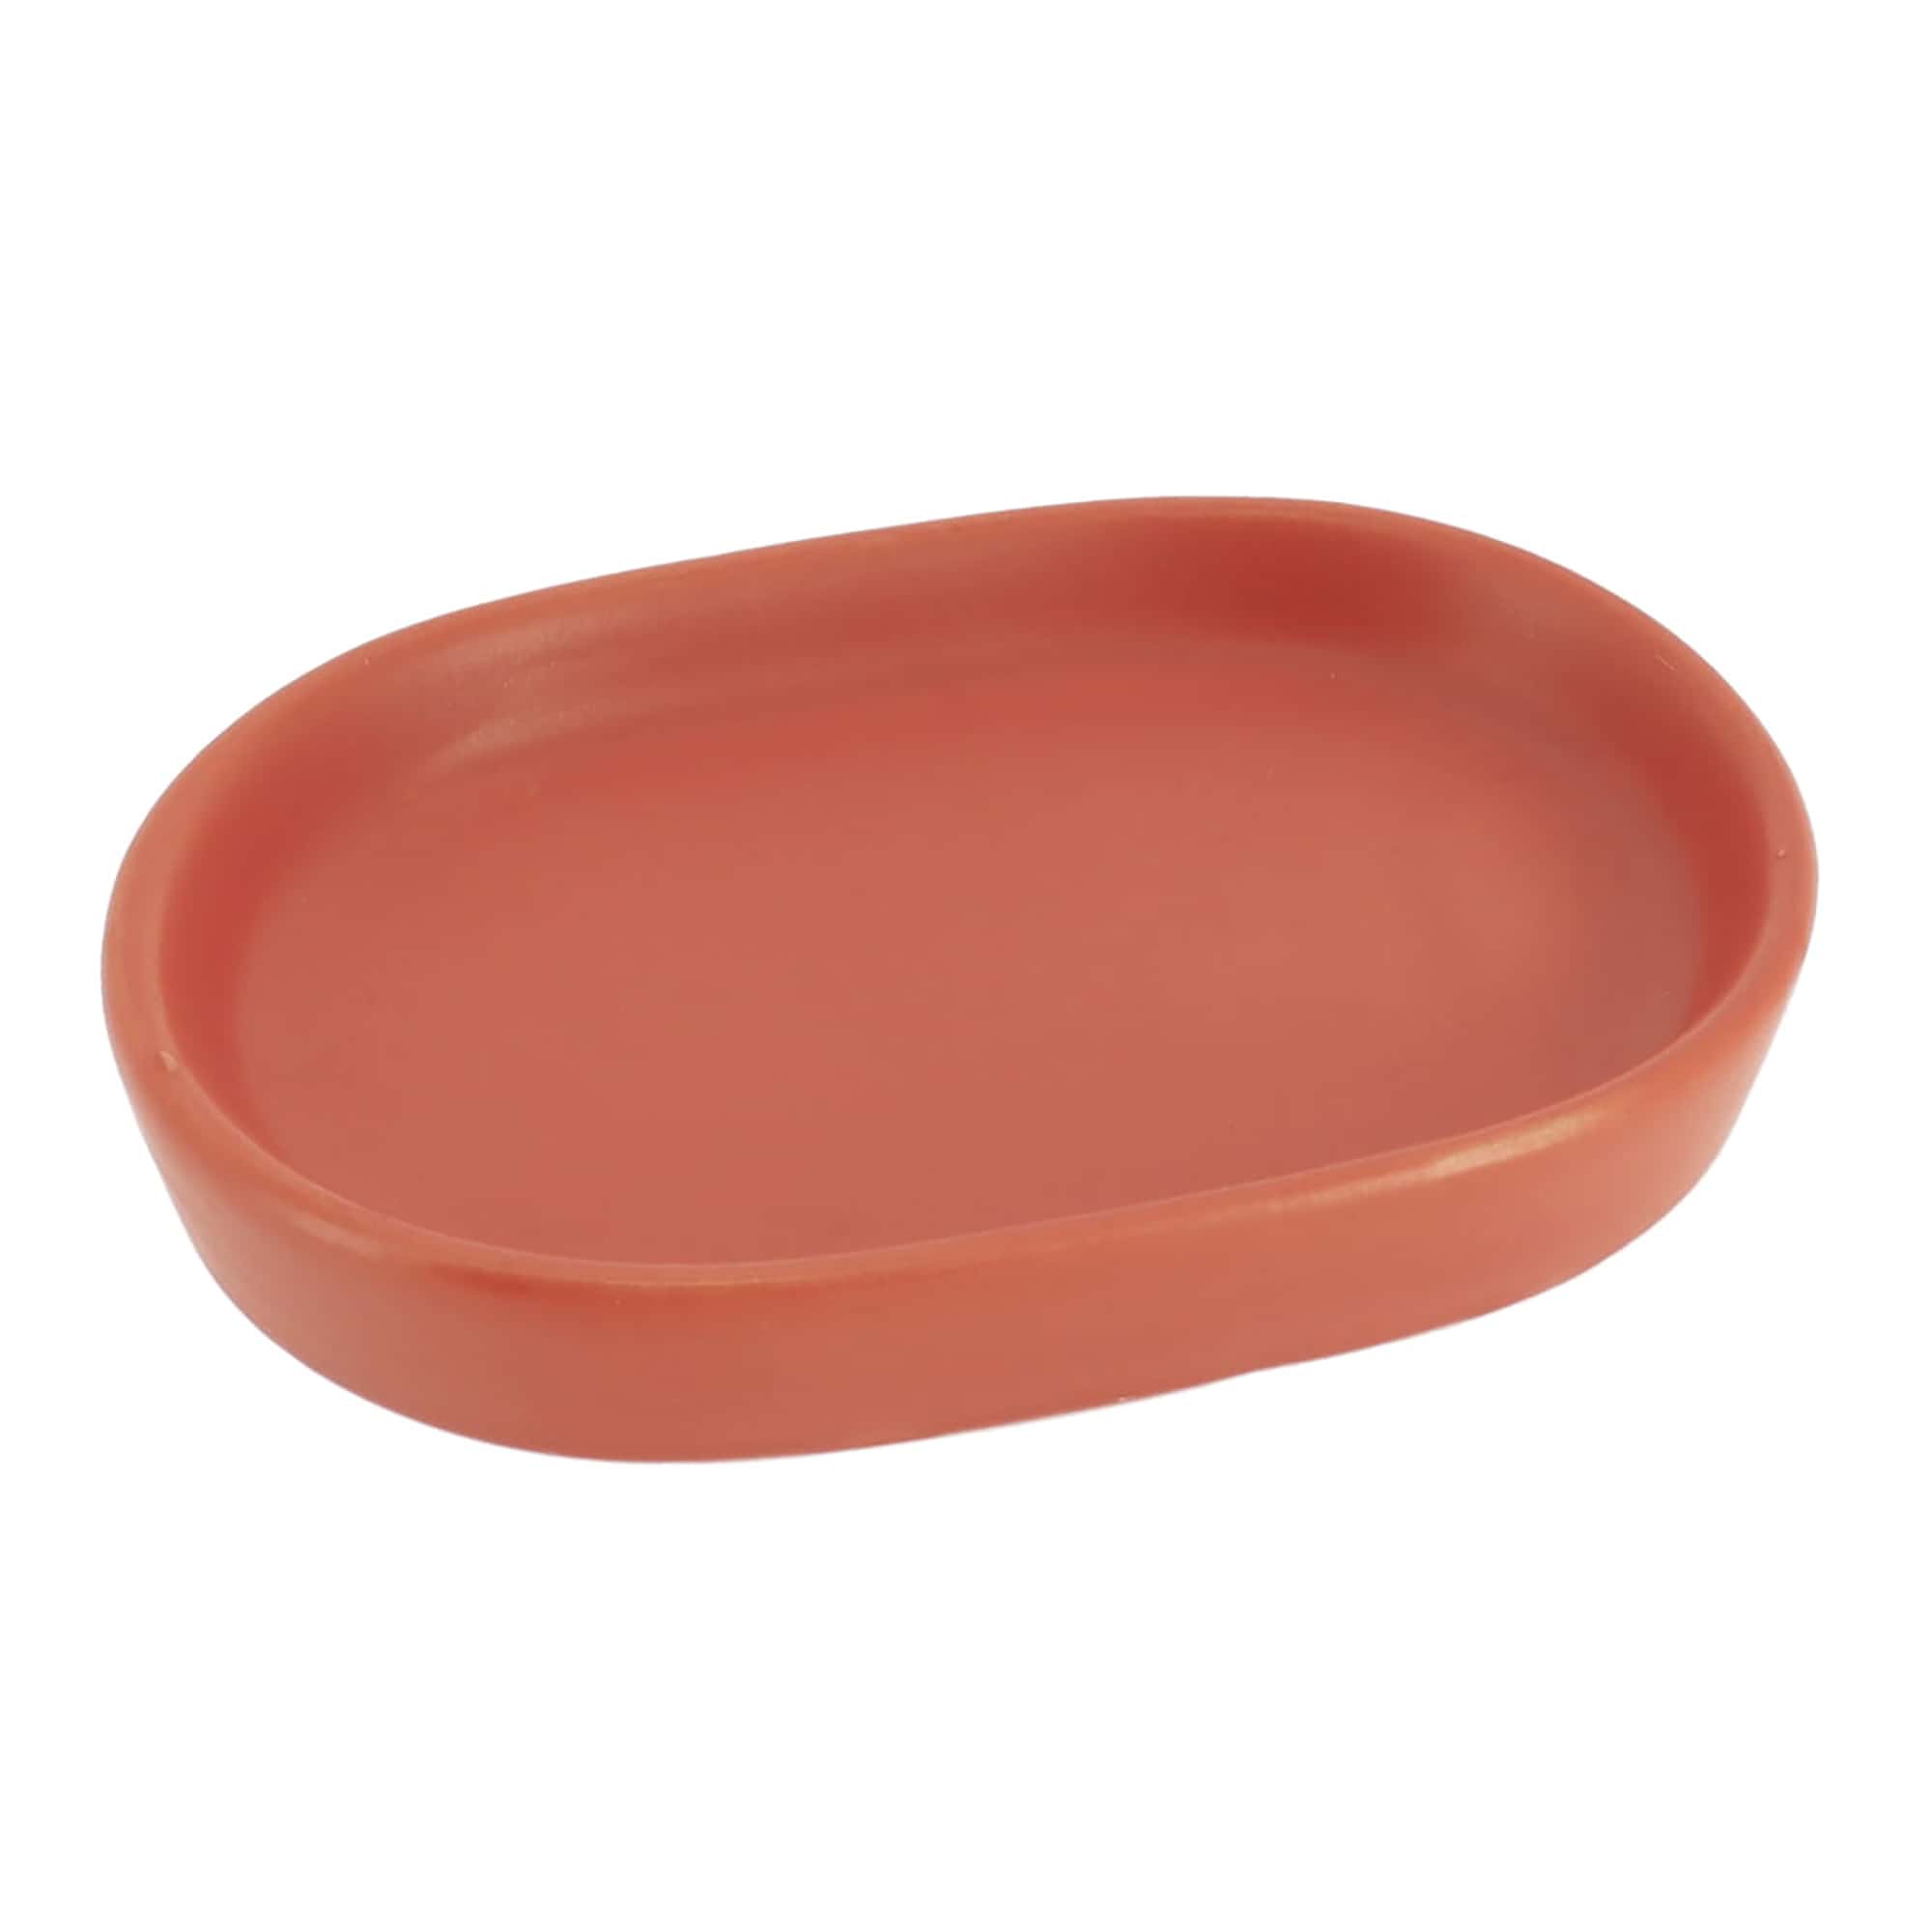 Rustic Stoneware Soap Dish Cup in Terracotta- A Touch of Beauty